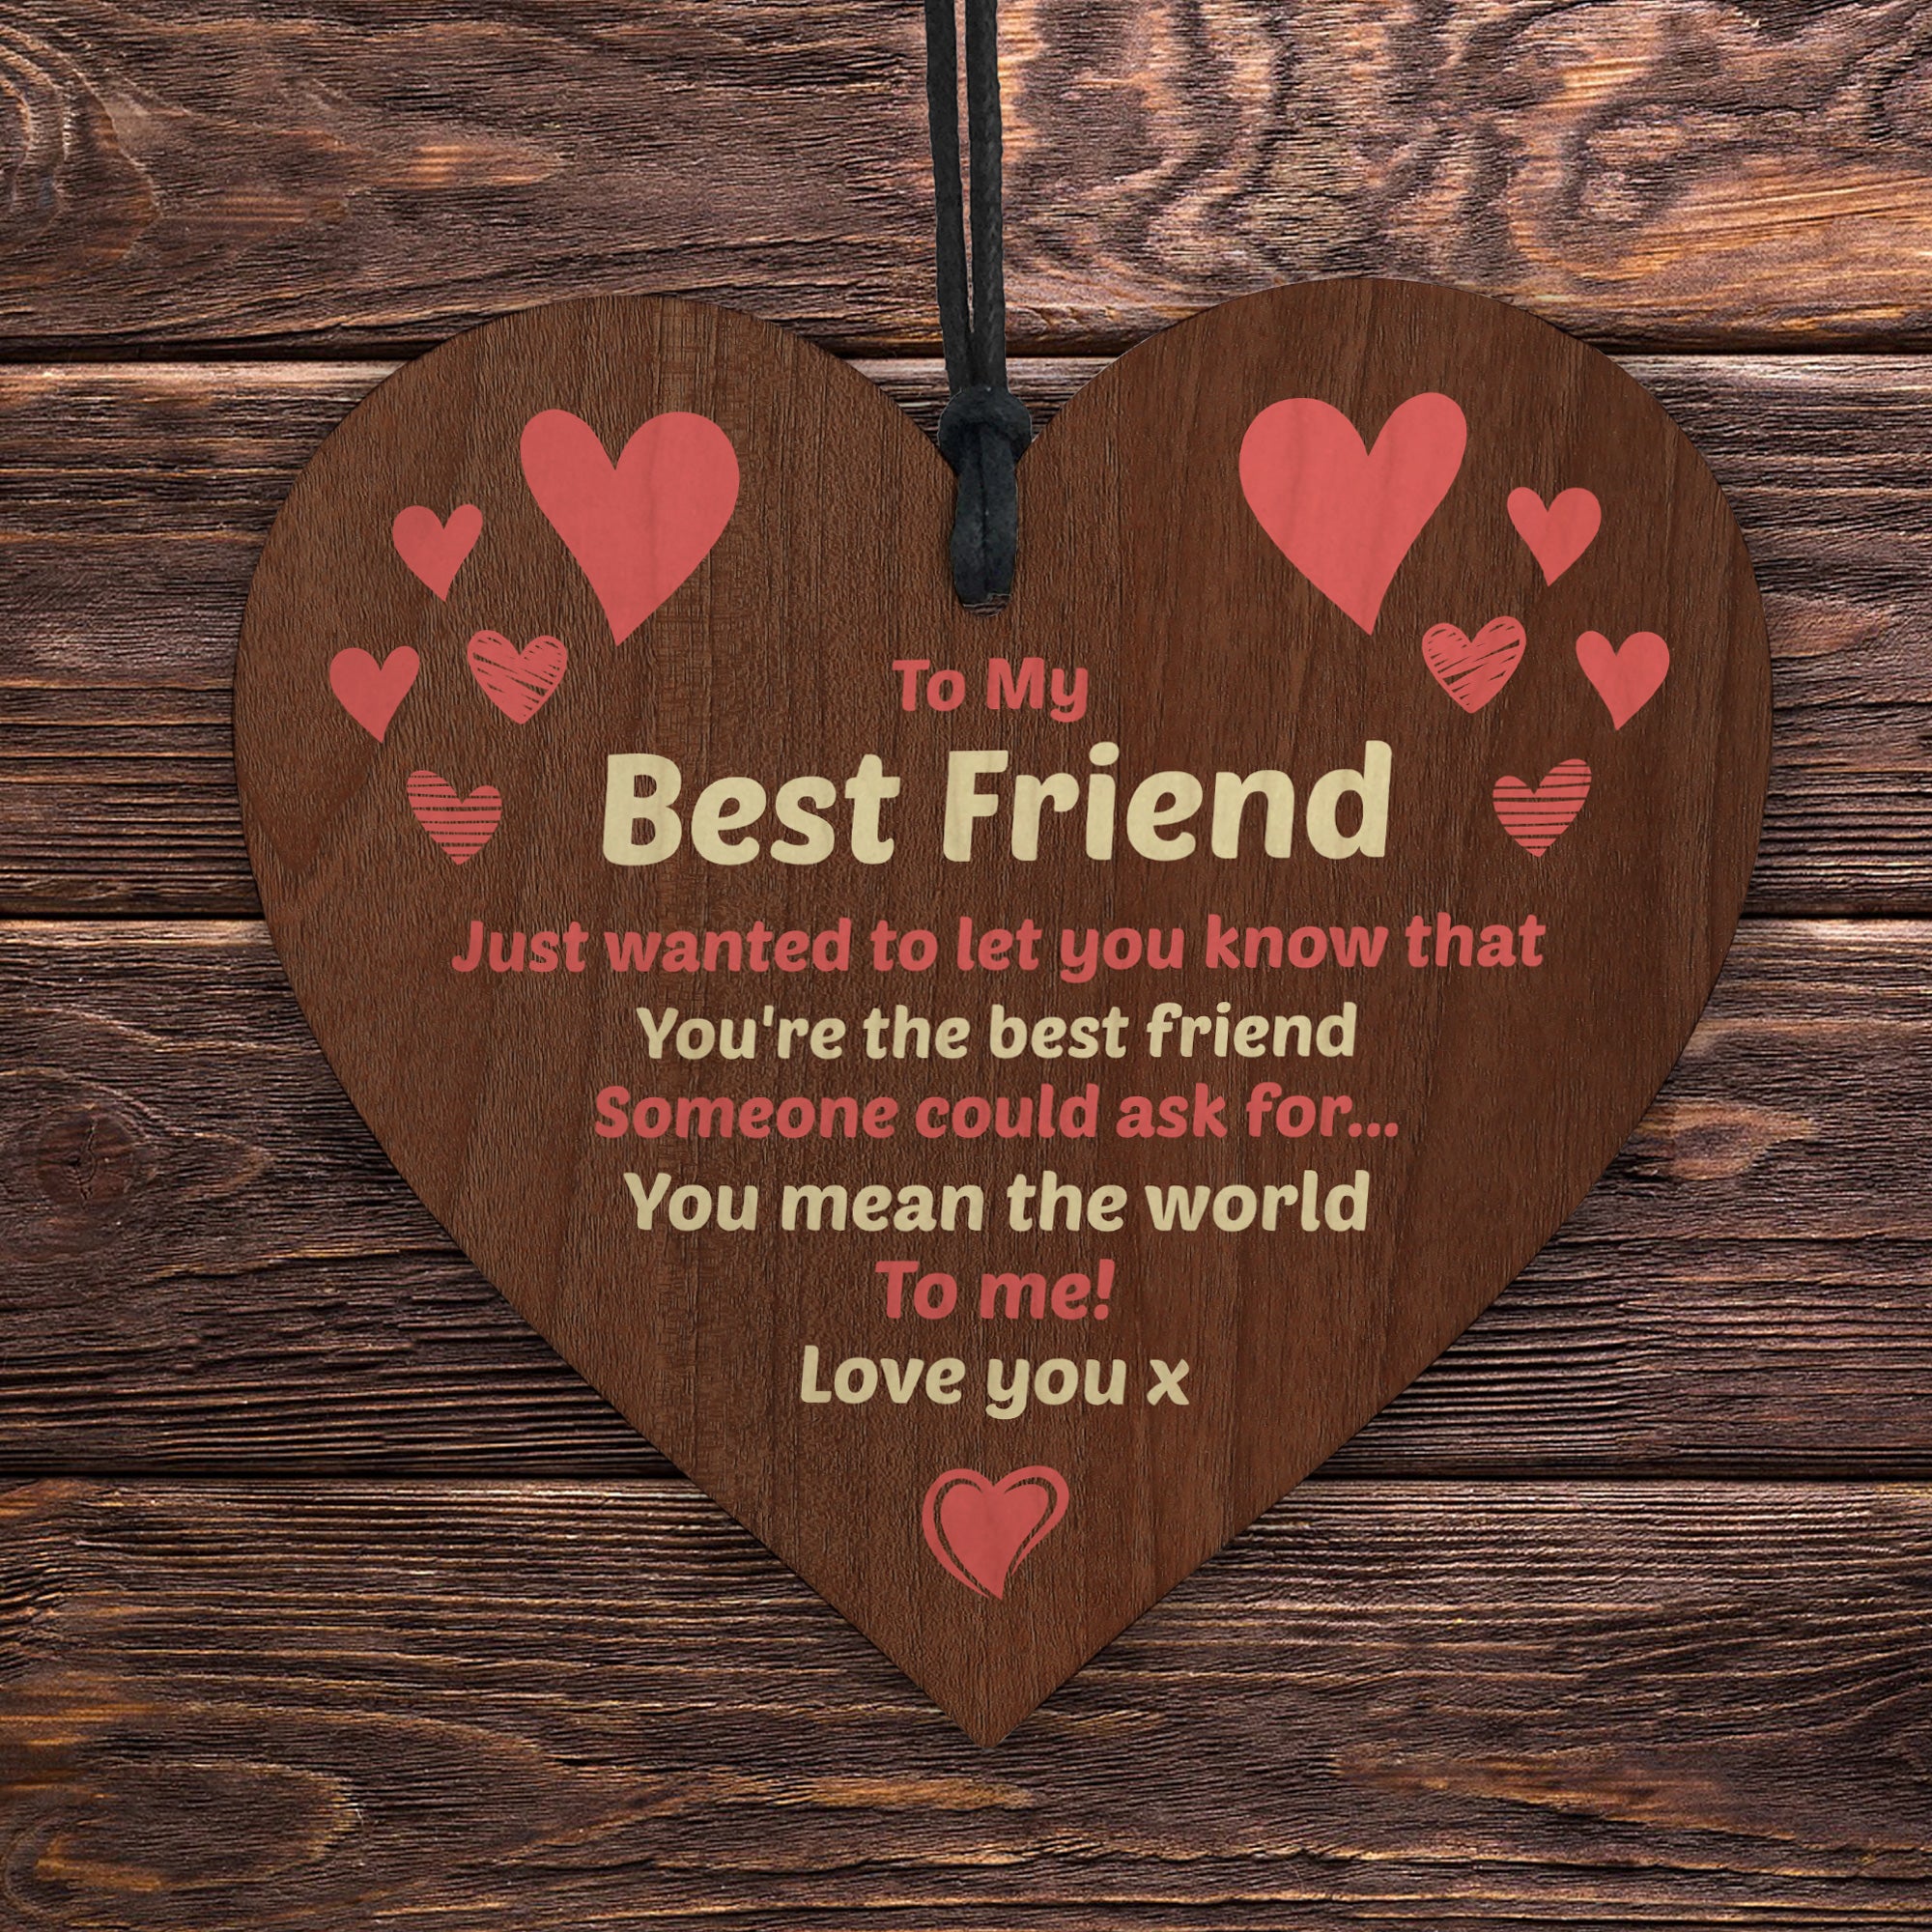 59 Unique Best Friend Gifts That Show How Much You Care 2022 | Teen Vogue